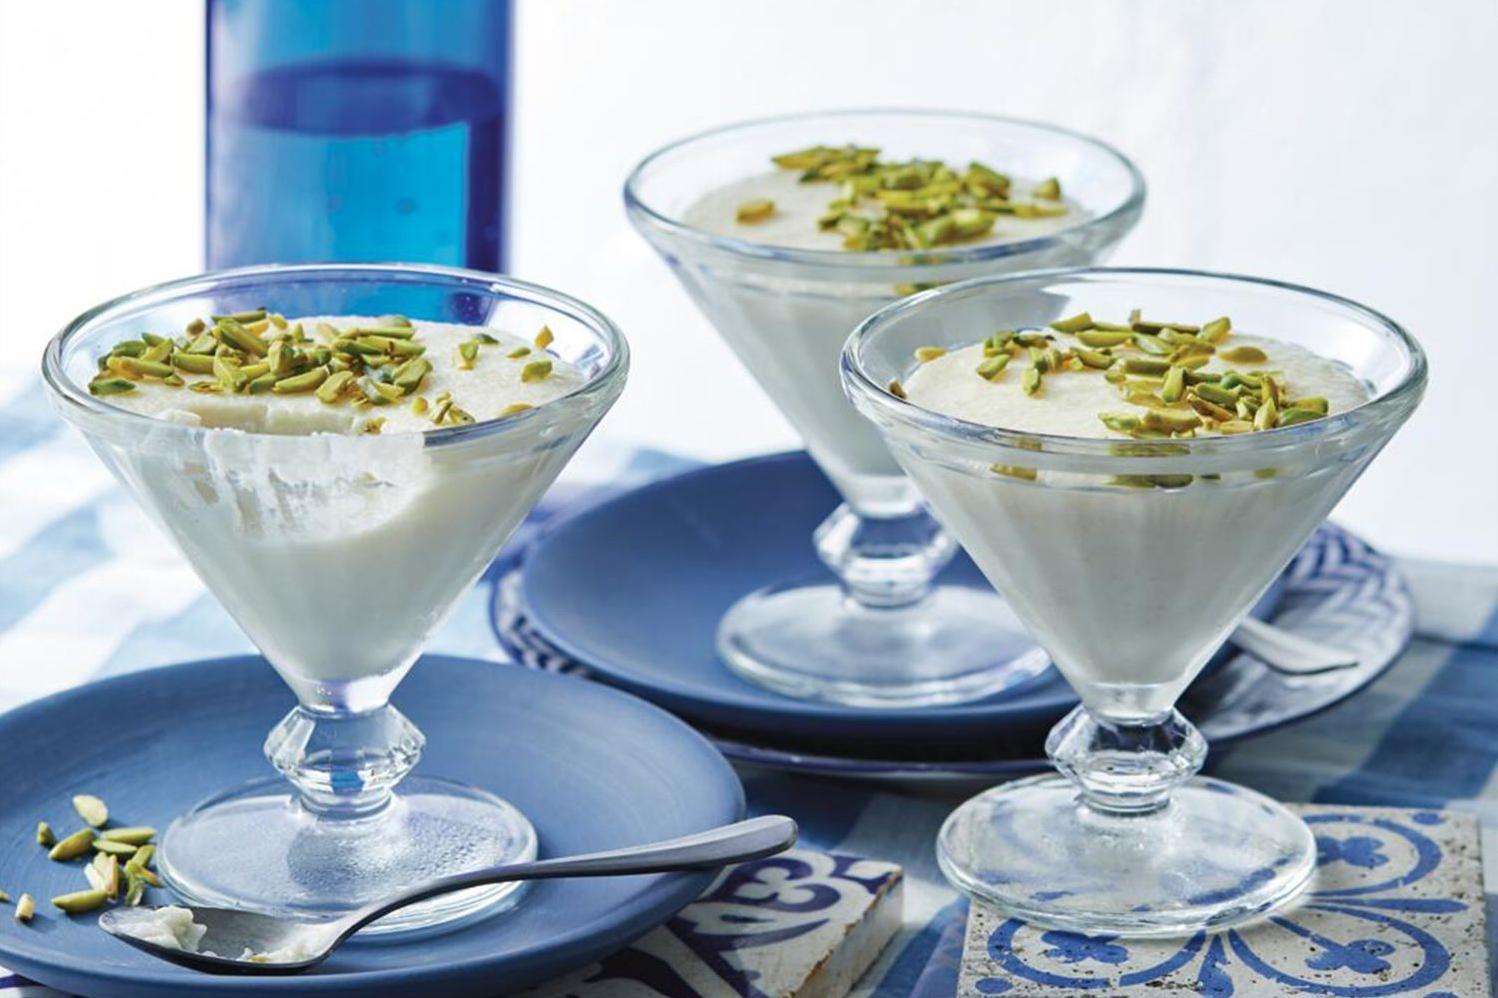  This dessert speaks to the heart of Middle Eastern cuisine, and is a staple dish across the region.